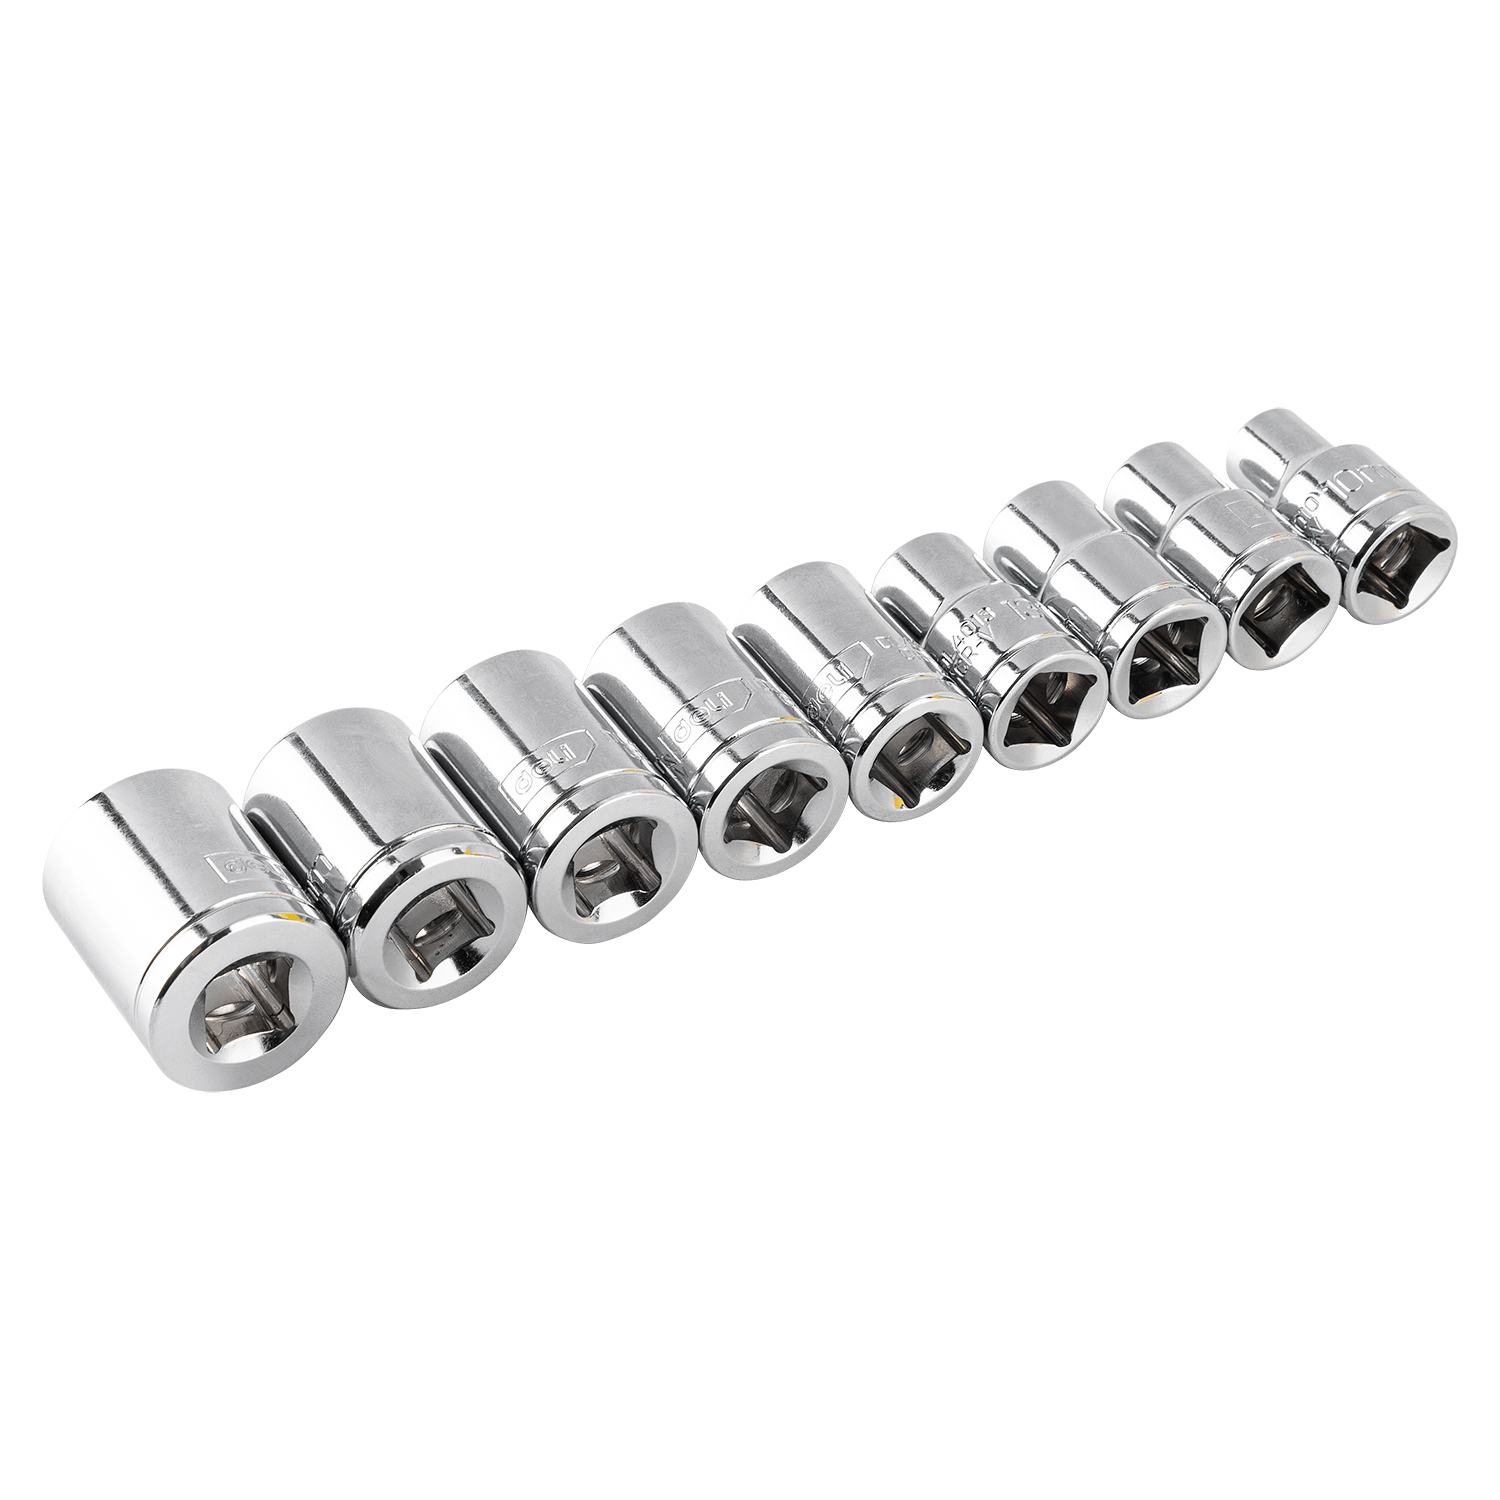 Chrome-plated Hex Sockets And Accessories For auto repair